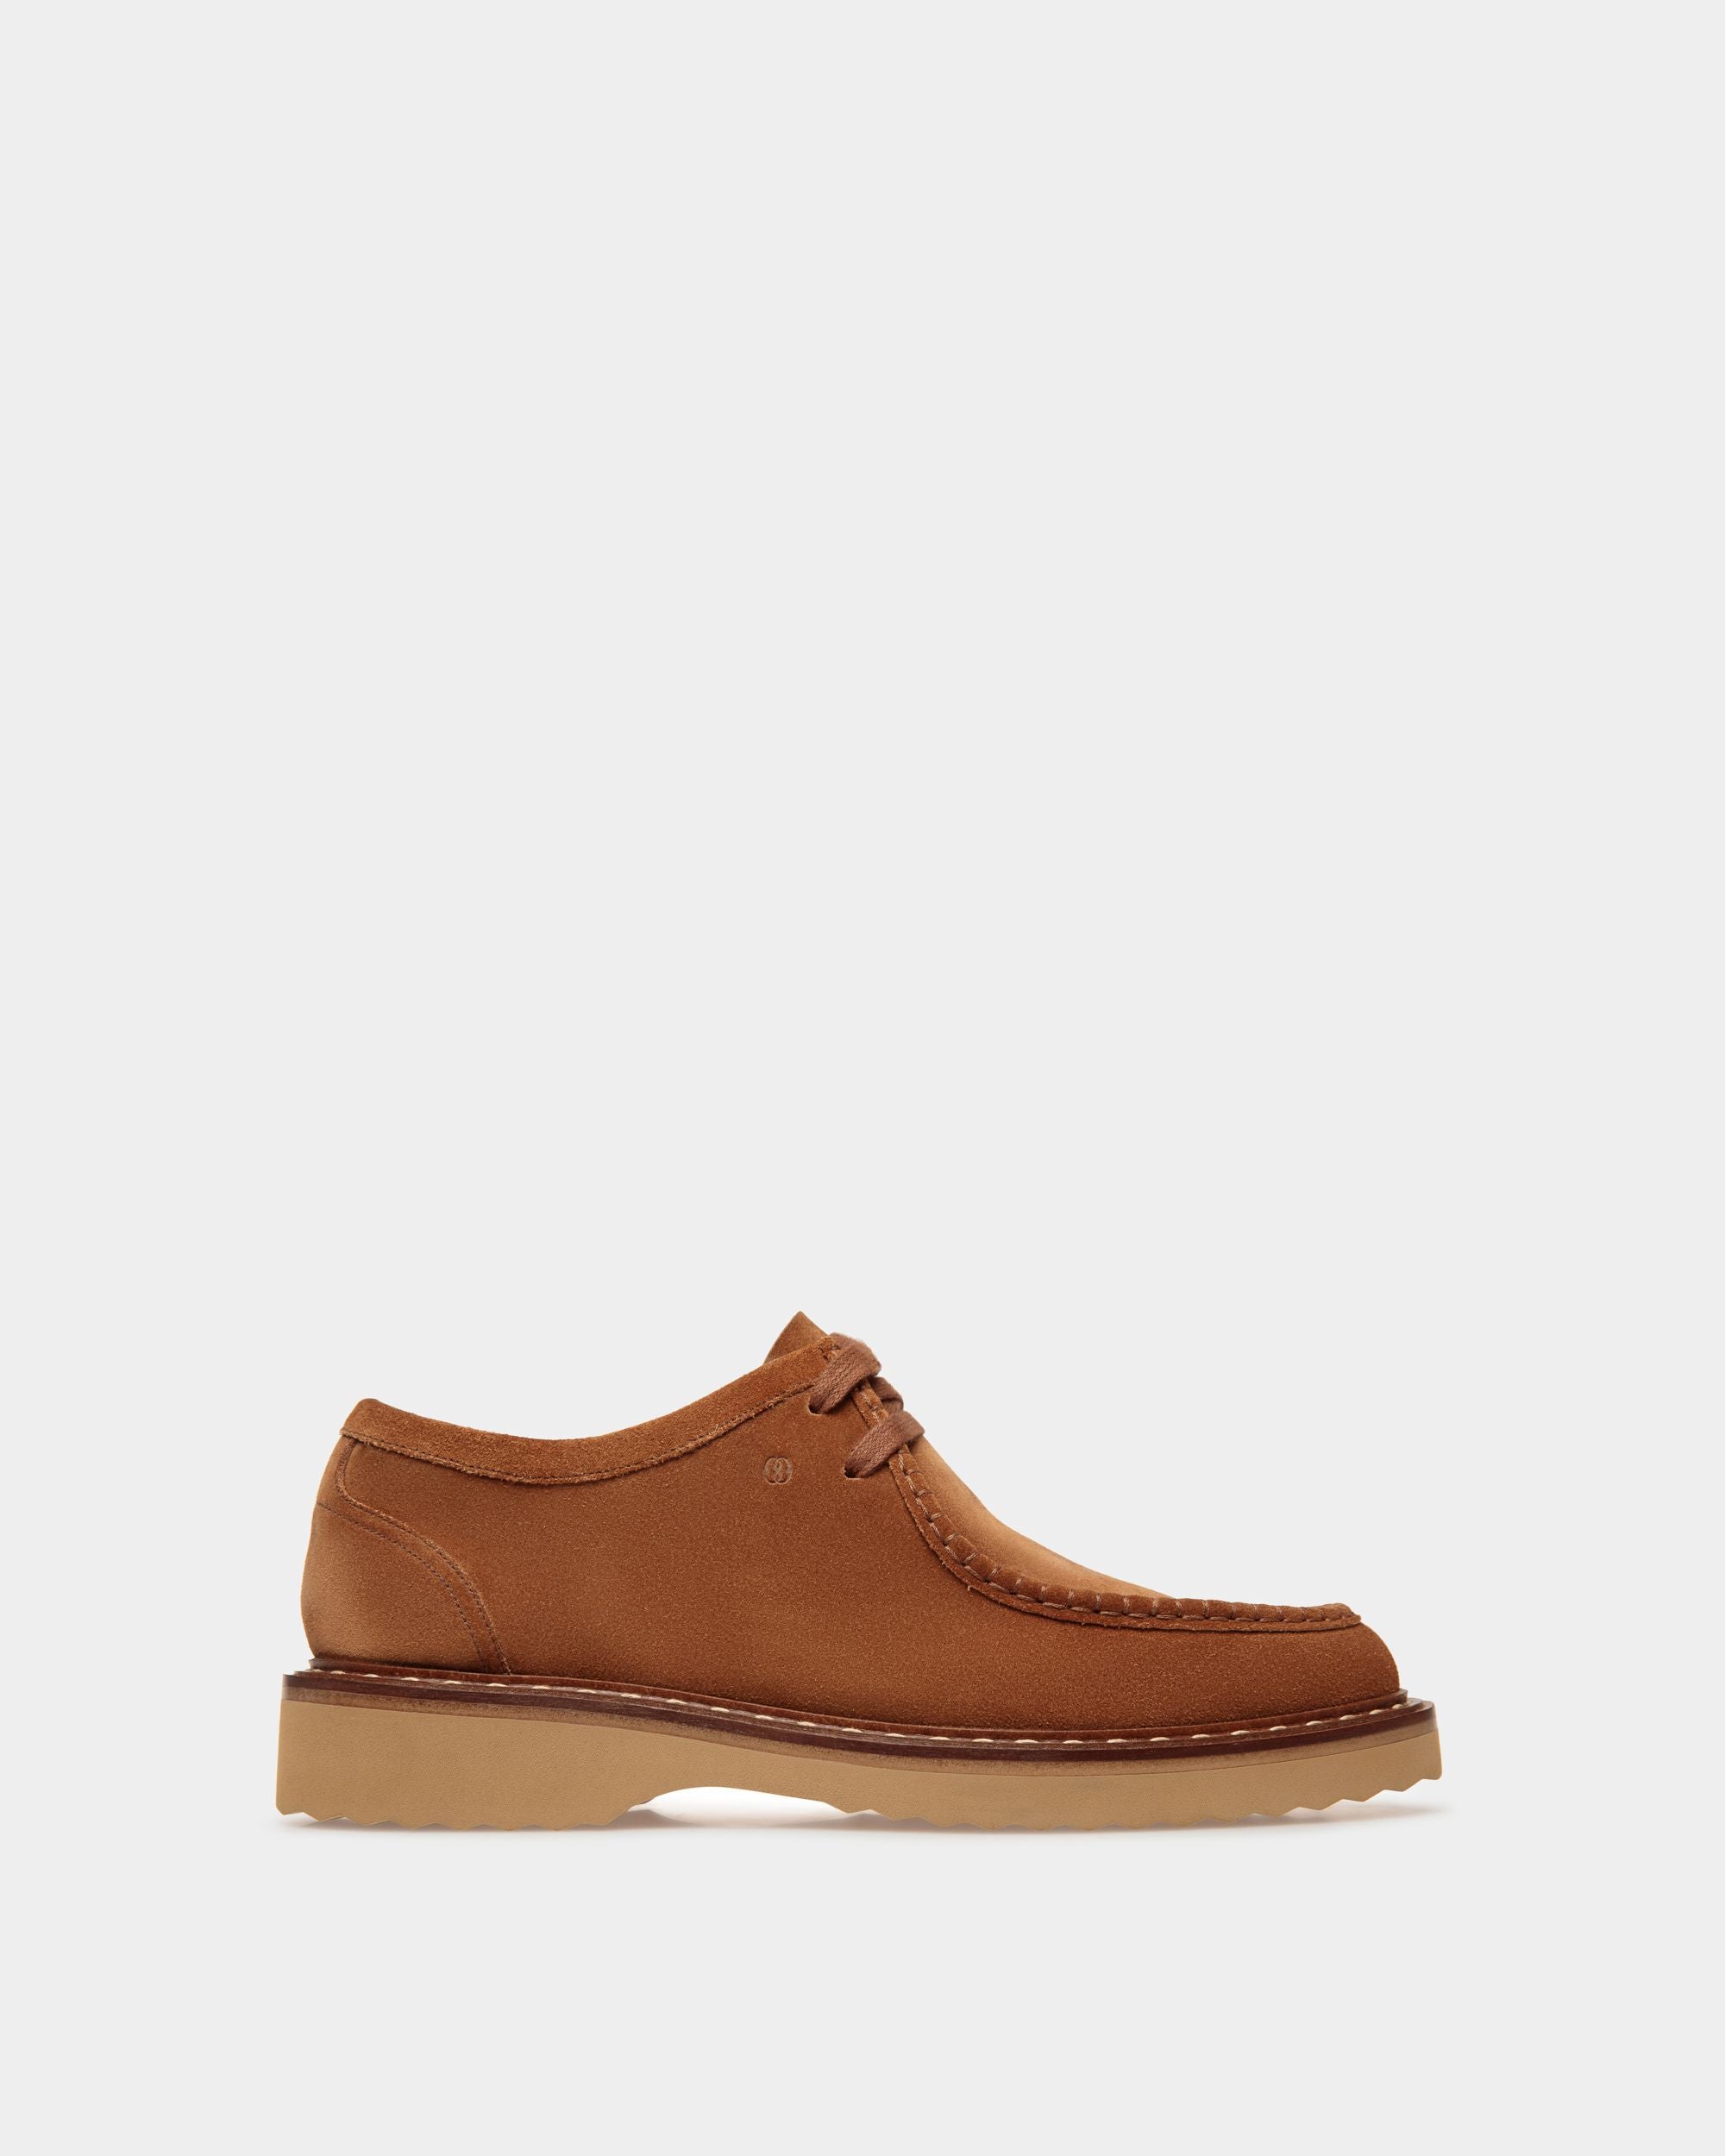 Neasden Derby Shoes | Men's Shoes | Light Brown Suede | Bally | Still Life Side